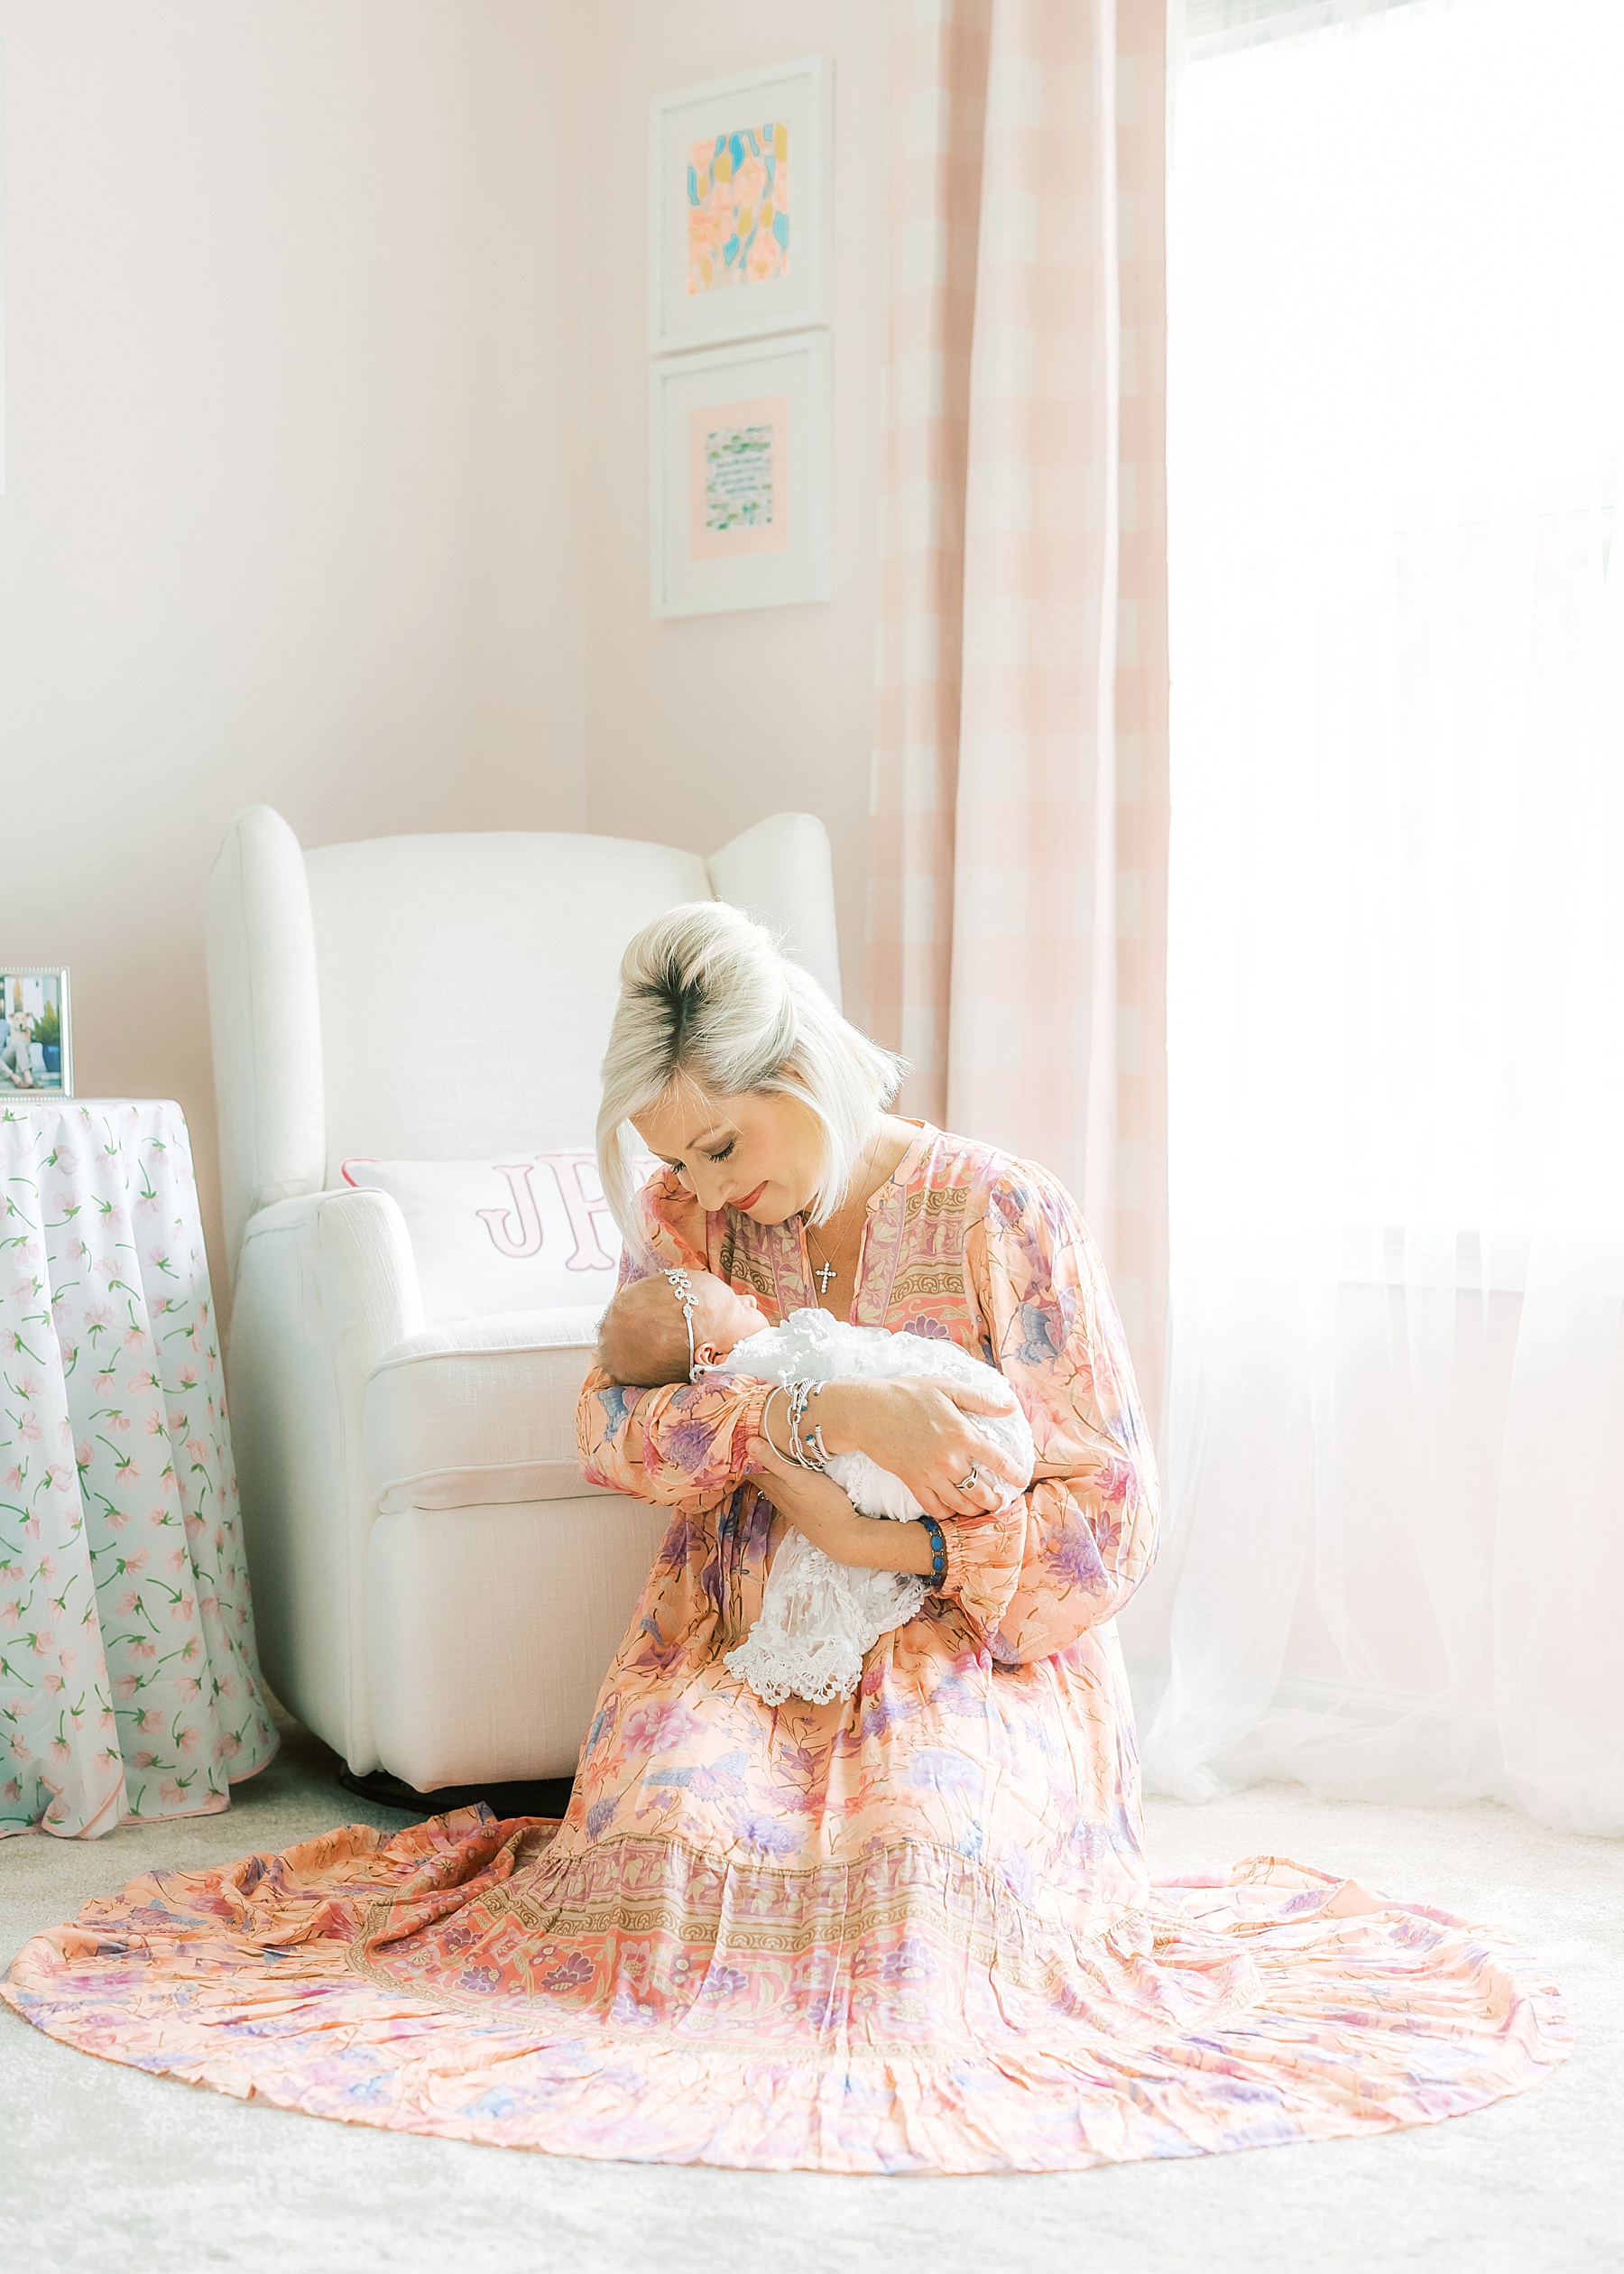 woman holding a newborn baby girl wrapped in white lace wearing pink floral boho maxi dress, woman sitting down on floor in baby girl nursery, pink walls